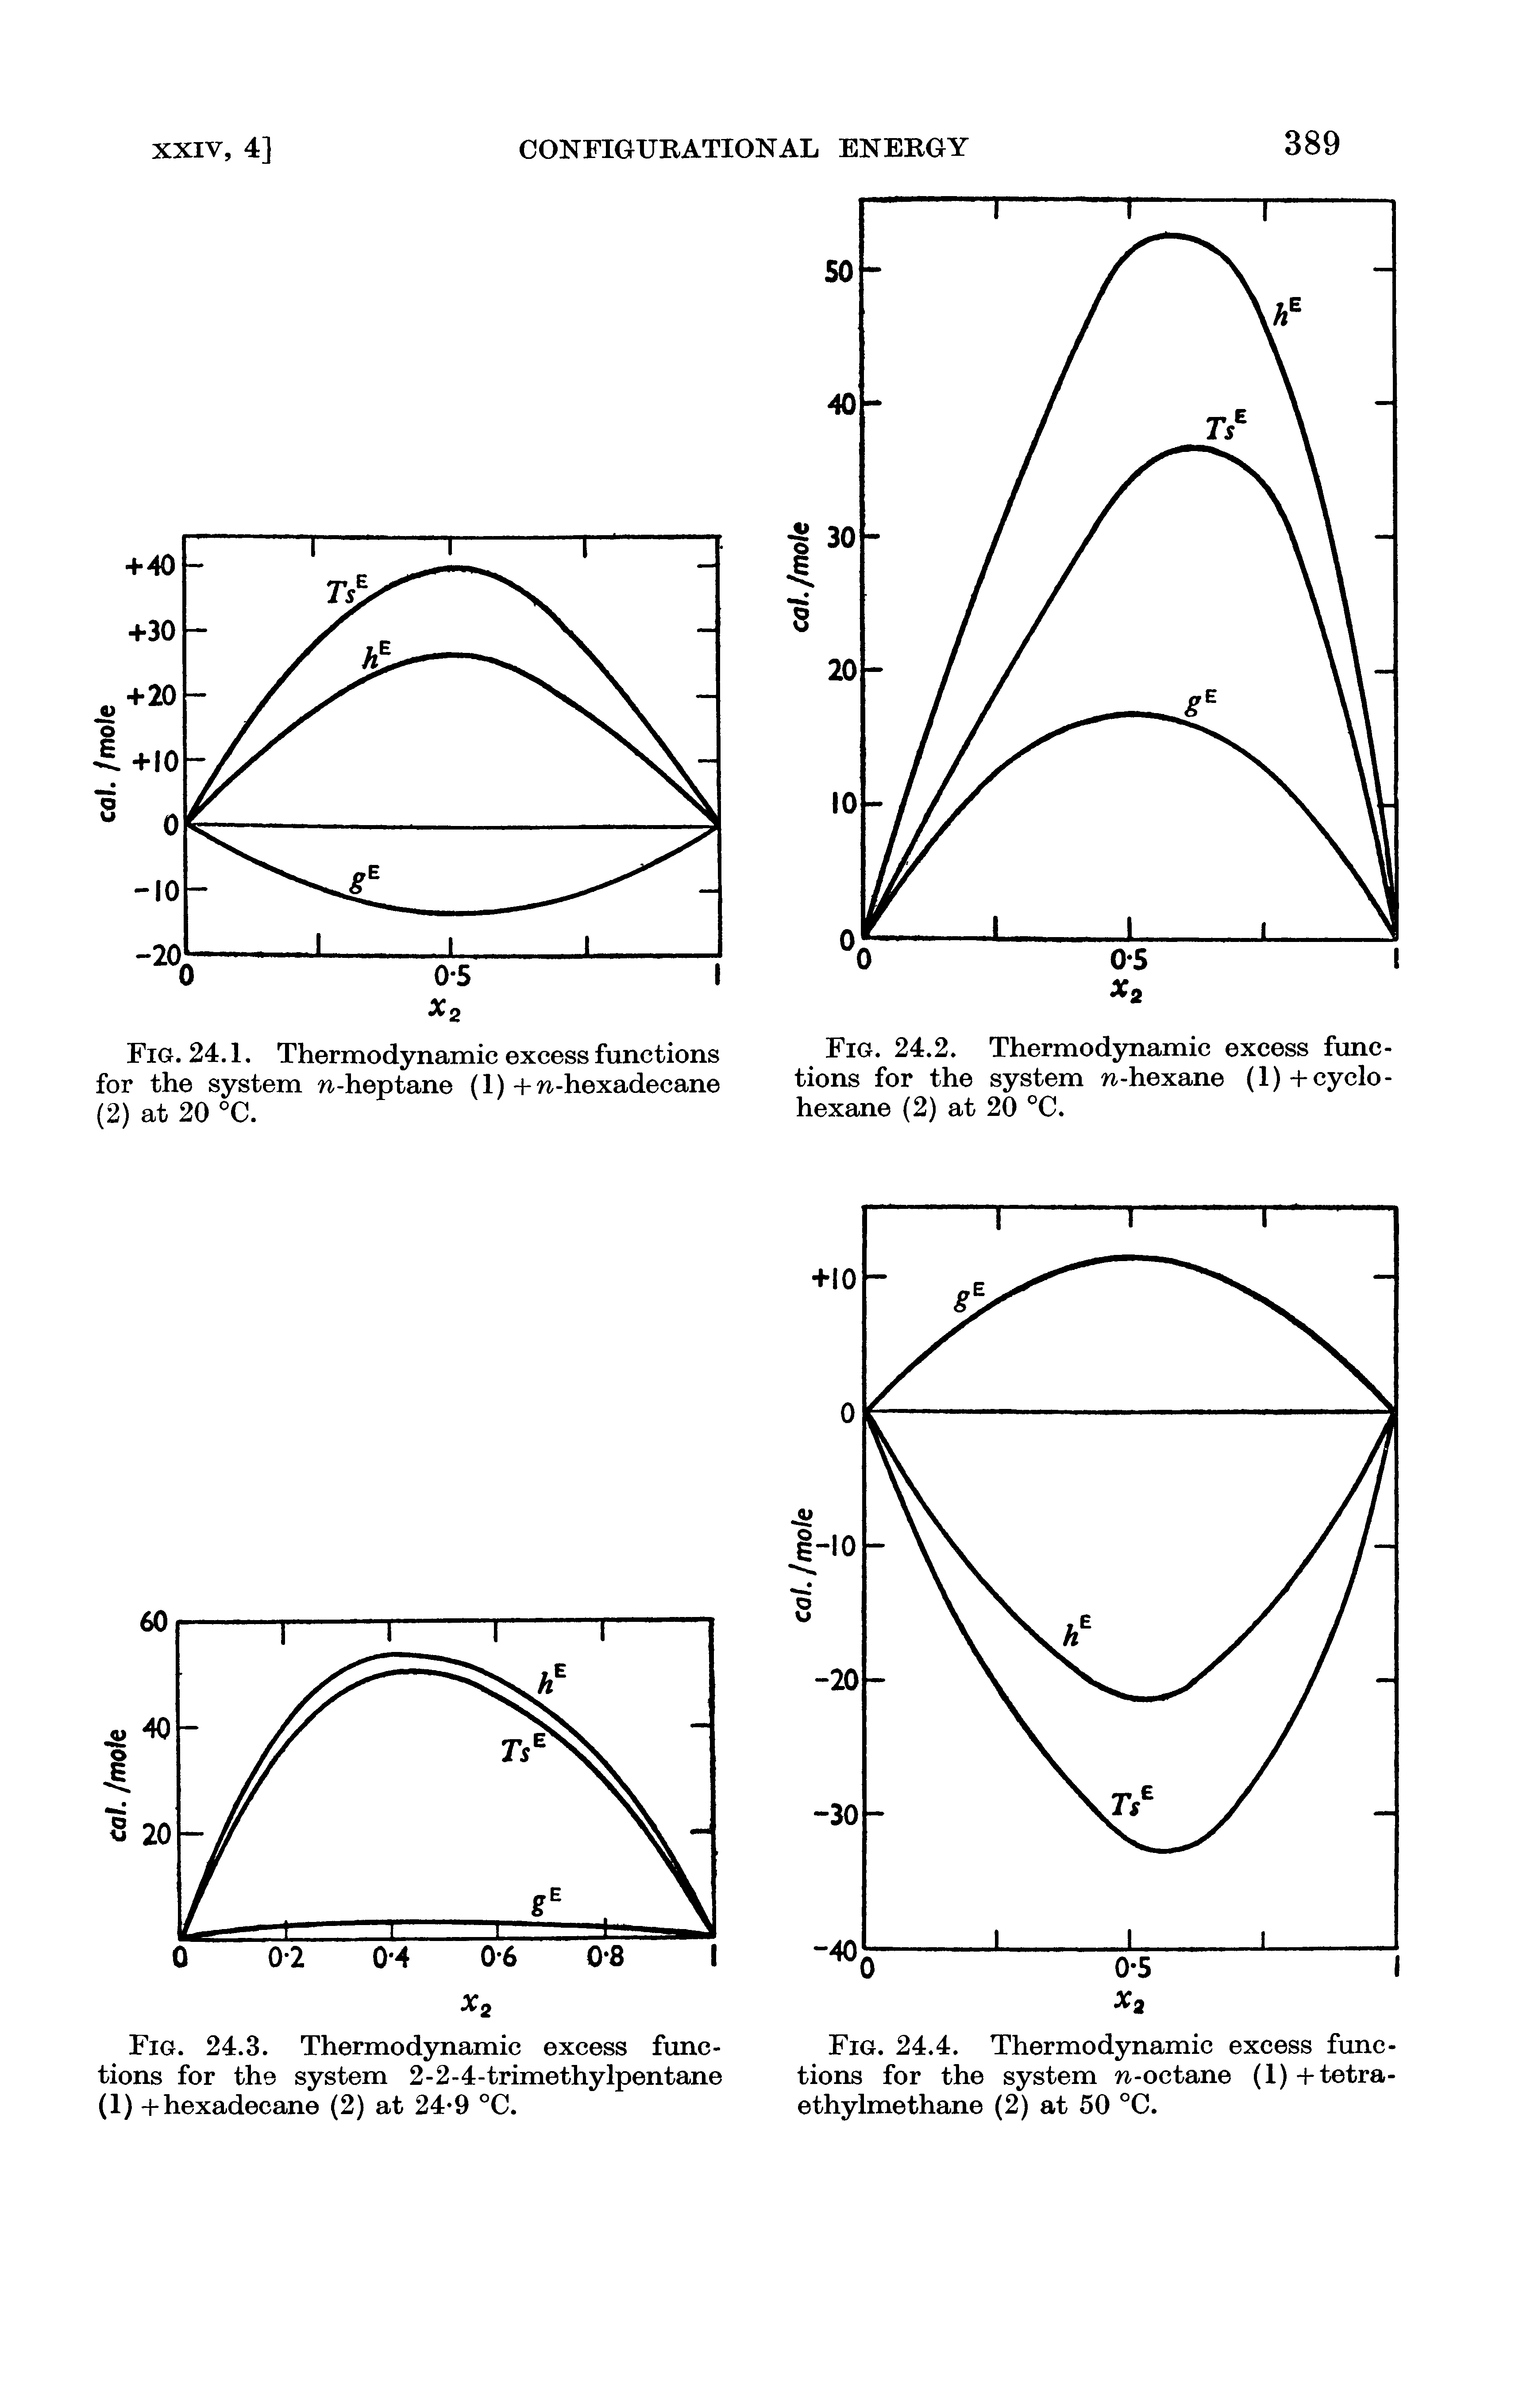 Fig. 24.1. Thermodynamic excess functions for the system n-heptane (1) + n-hexadecane (2) at 20 °C.